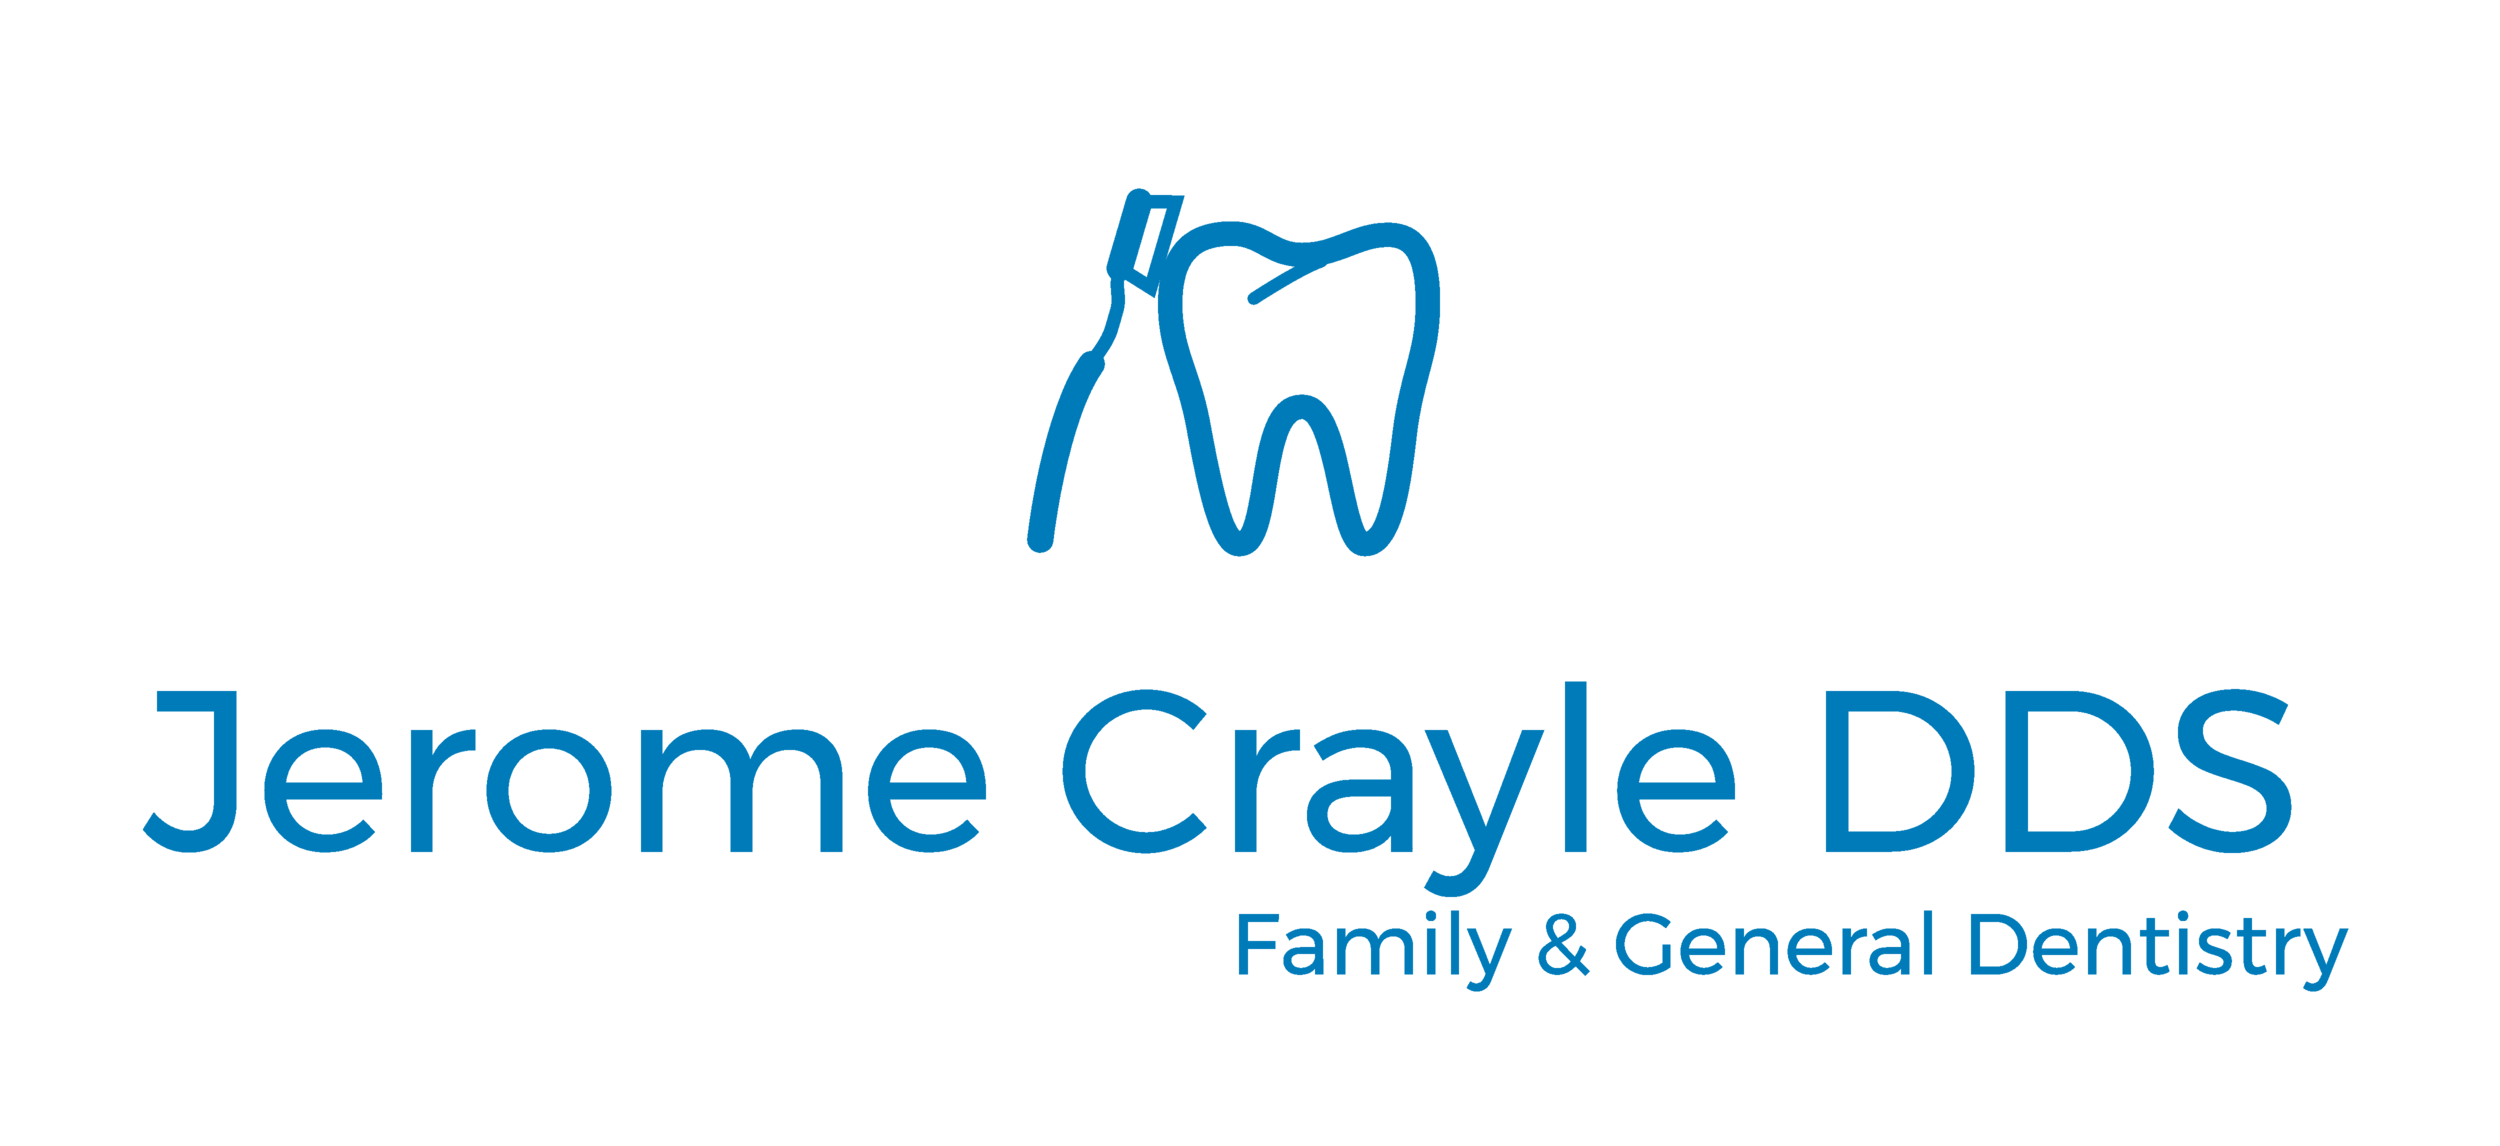 Jerome M. Crayle DDS